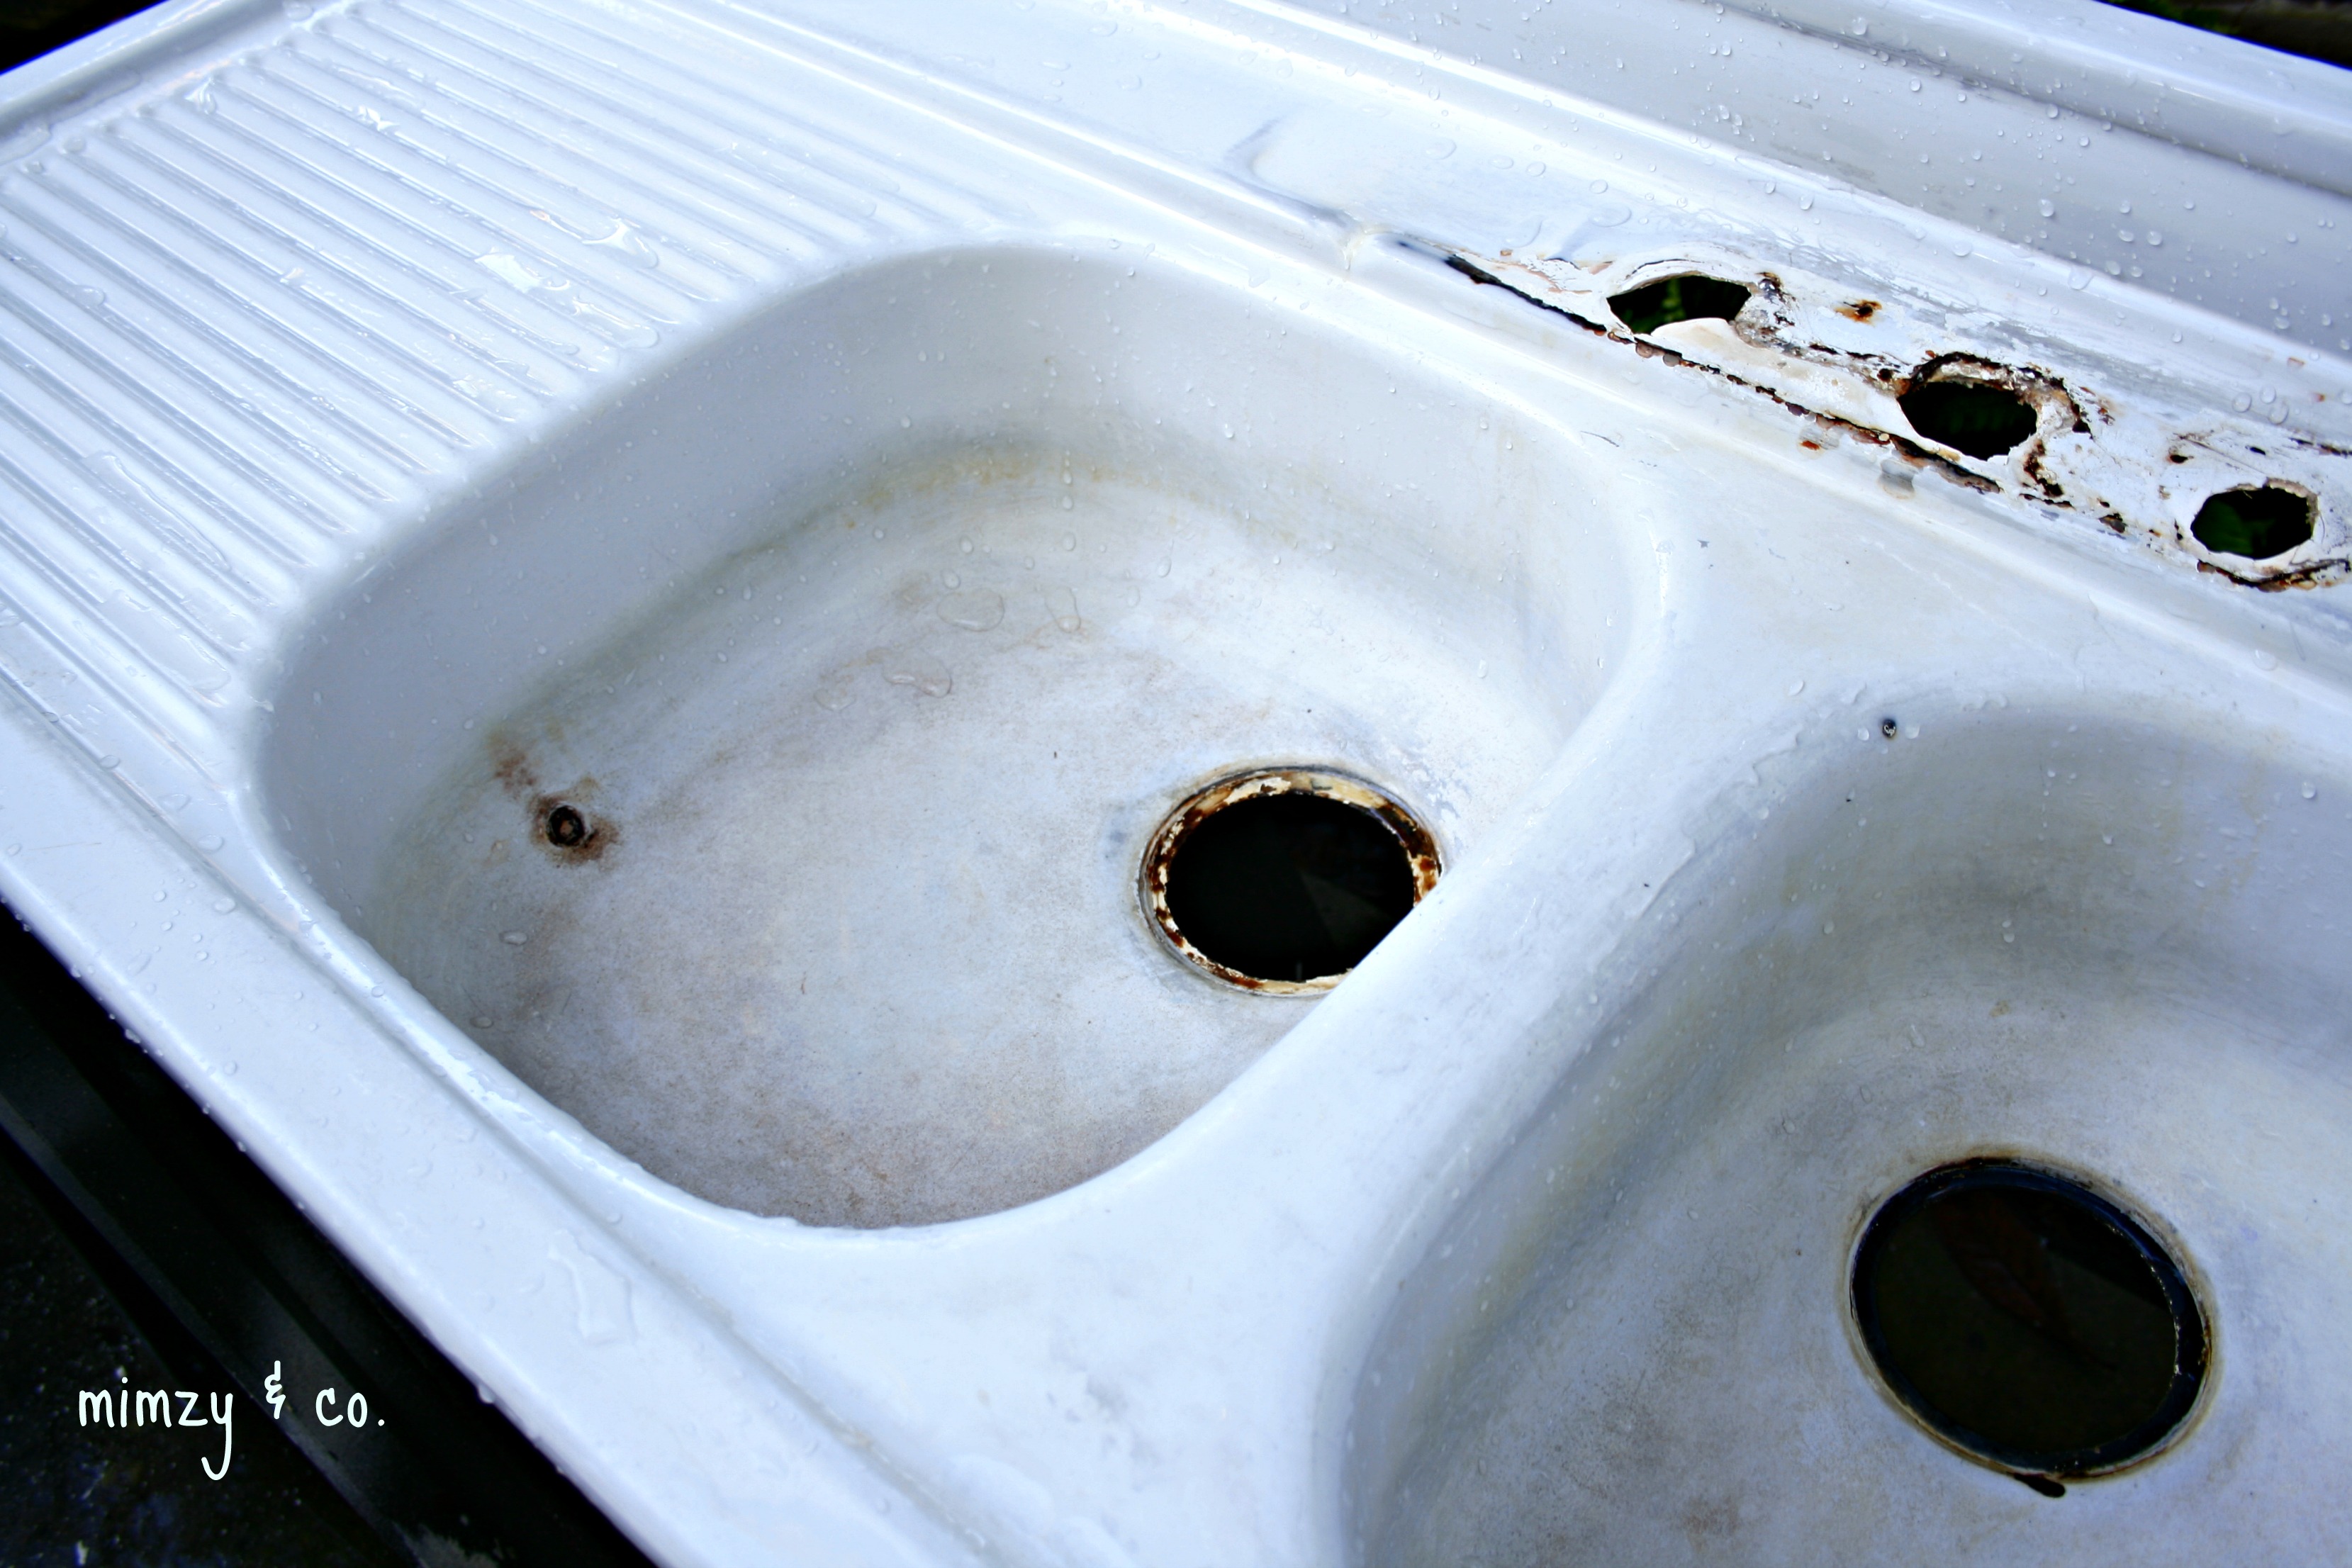 can you refinish cast iron kitchen sink